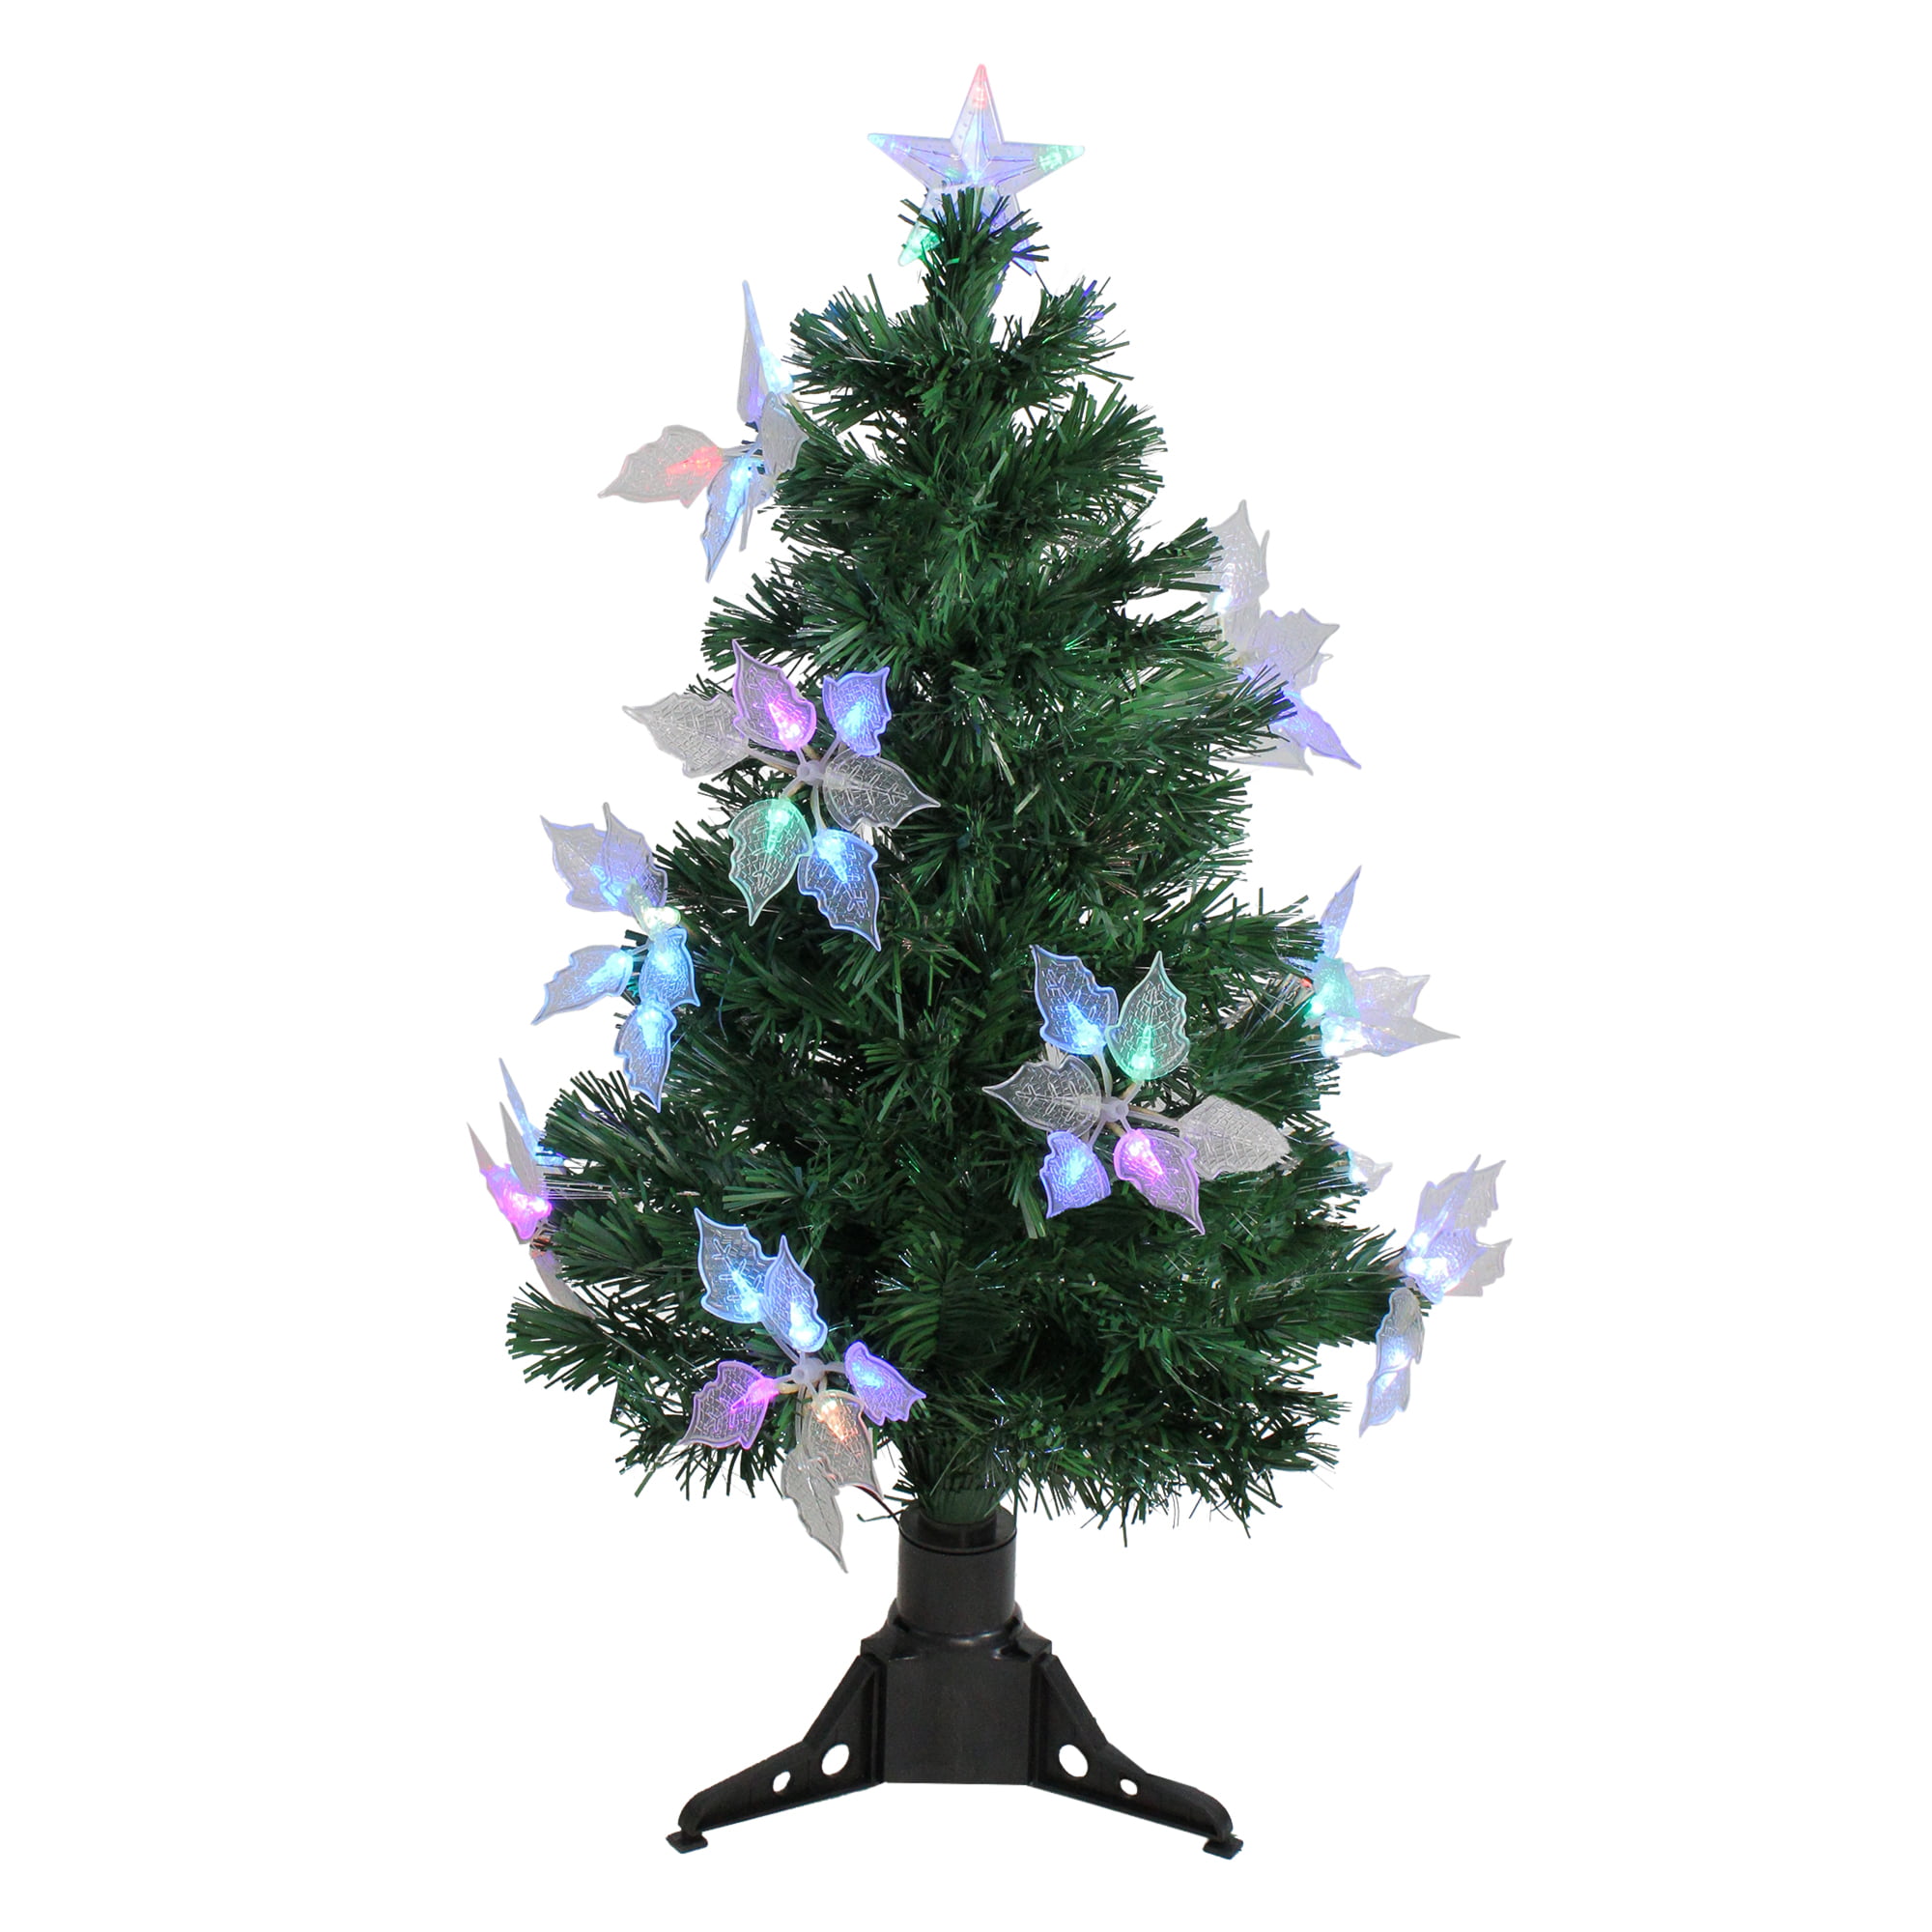 32” FIBER OPTIC GREEN CHRISTMAS TREE WITH BASE-PORTRAYS VARIETY OF VIVID COLORS!